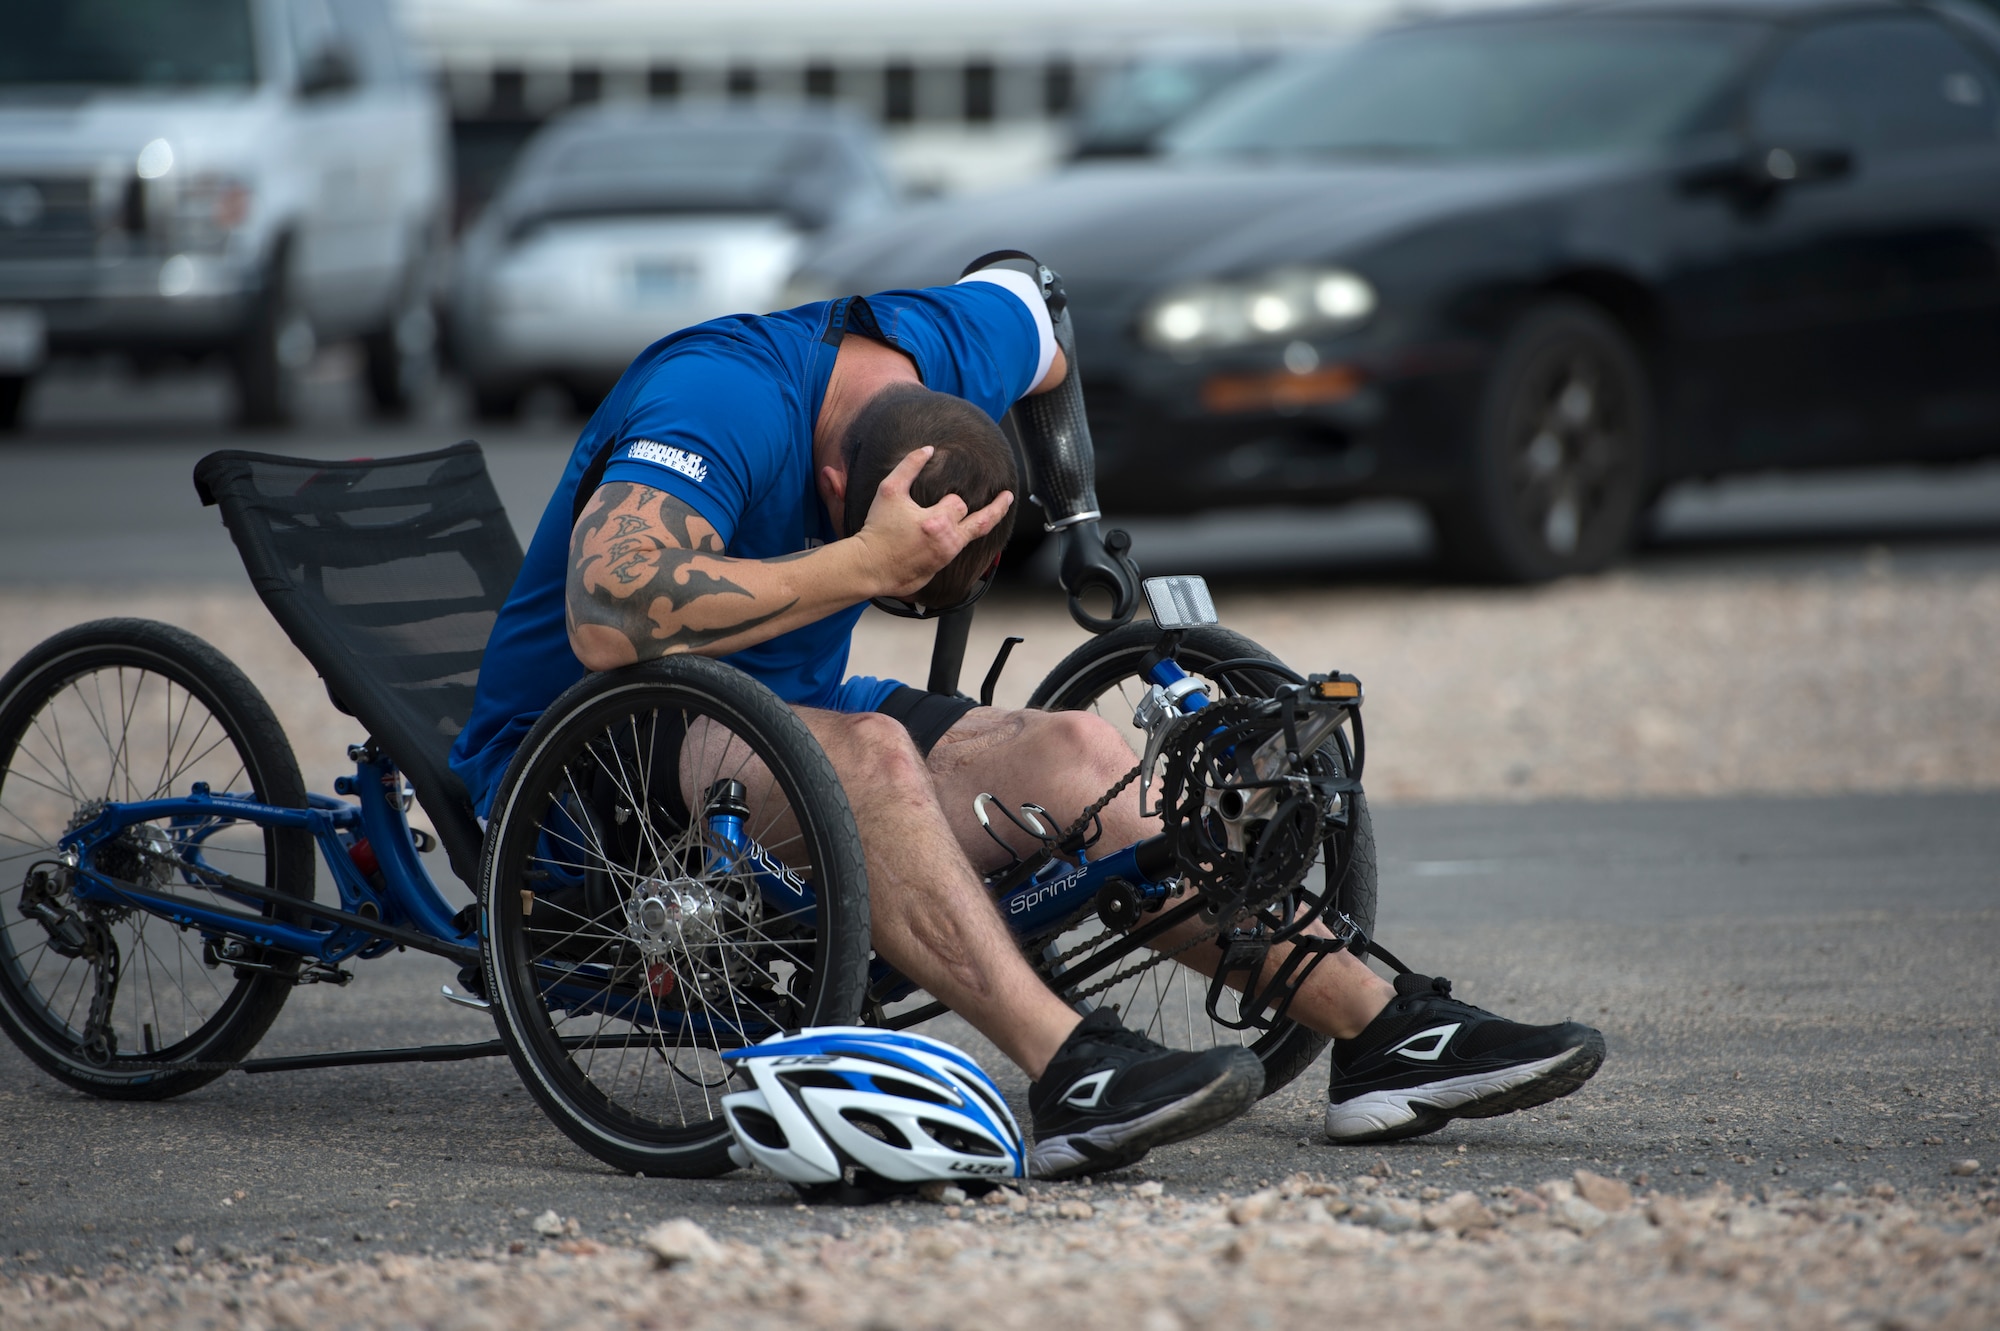 Leonard Anderson takes a moment to decompress after his race April 9, 2014, during the cycling portion of the Air Force Trials at Nellis Air Force Base, Nev.  Anderson, an Air Force wounded warrior, competed in the 12-mile men’s recumbent heat for an opportunity to make it on a team for the Warrior Games and Invictus Games.  (U.S. Air Force photo/Senior Airman Jette Carr)